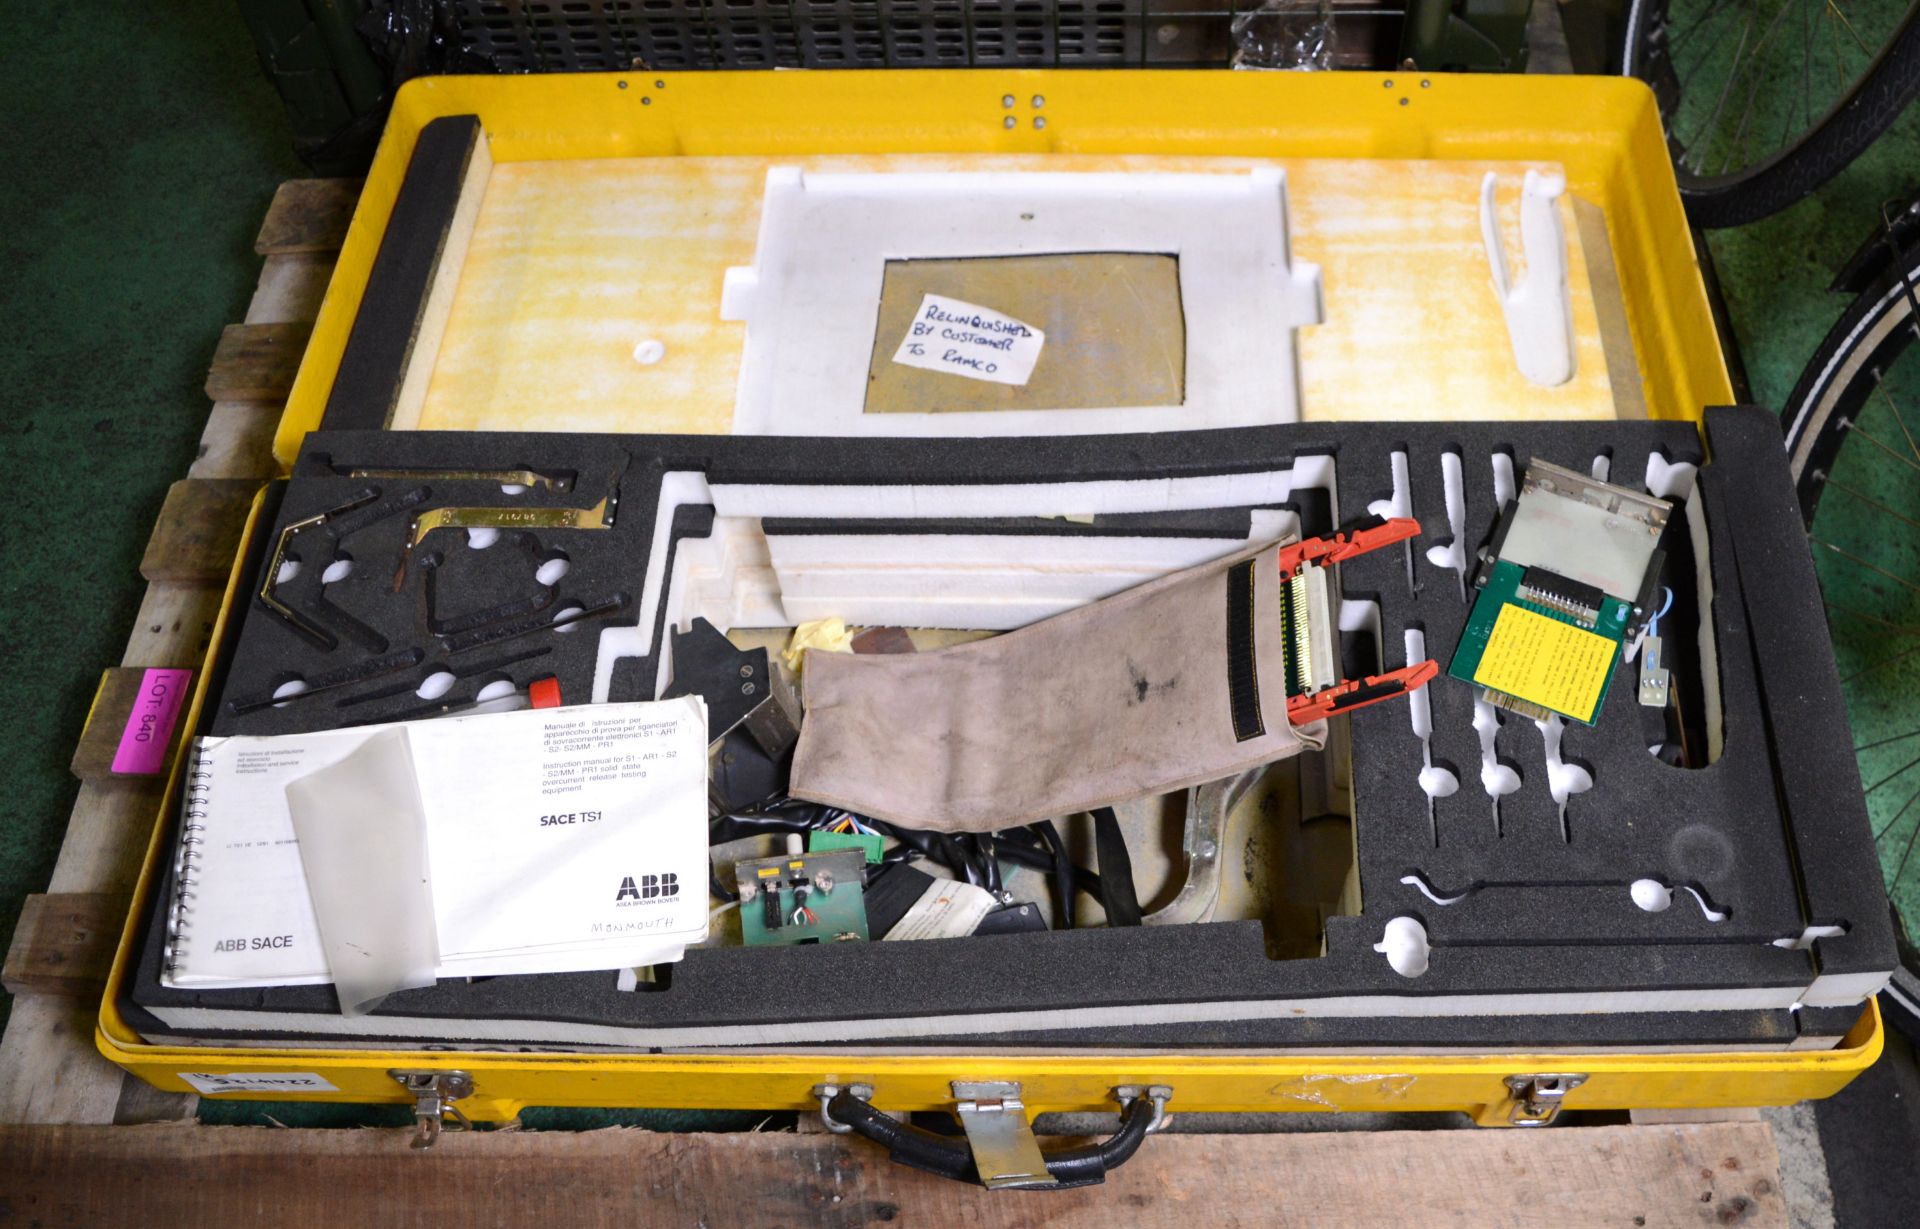 Equipment Case with some Components.